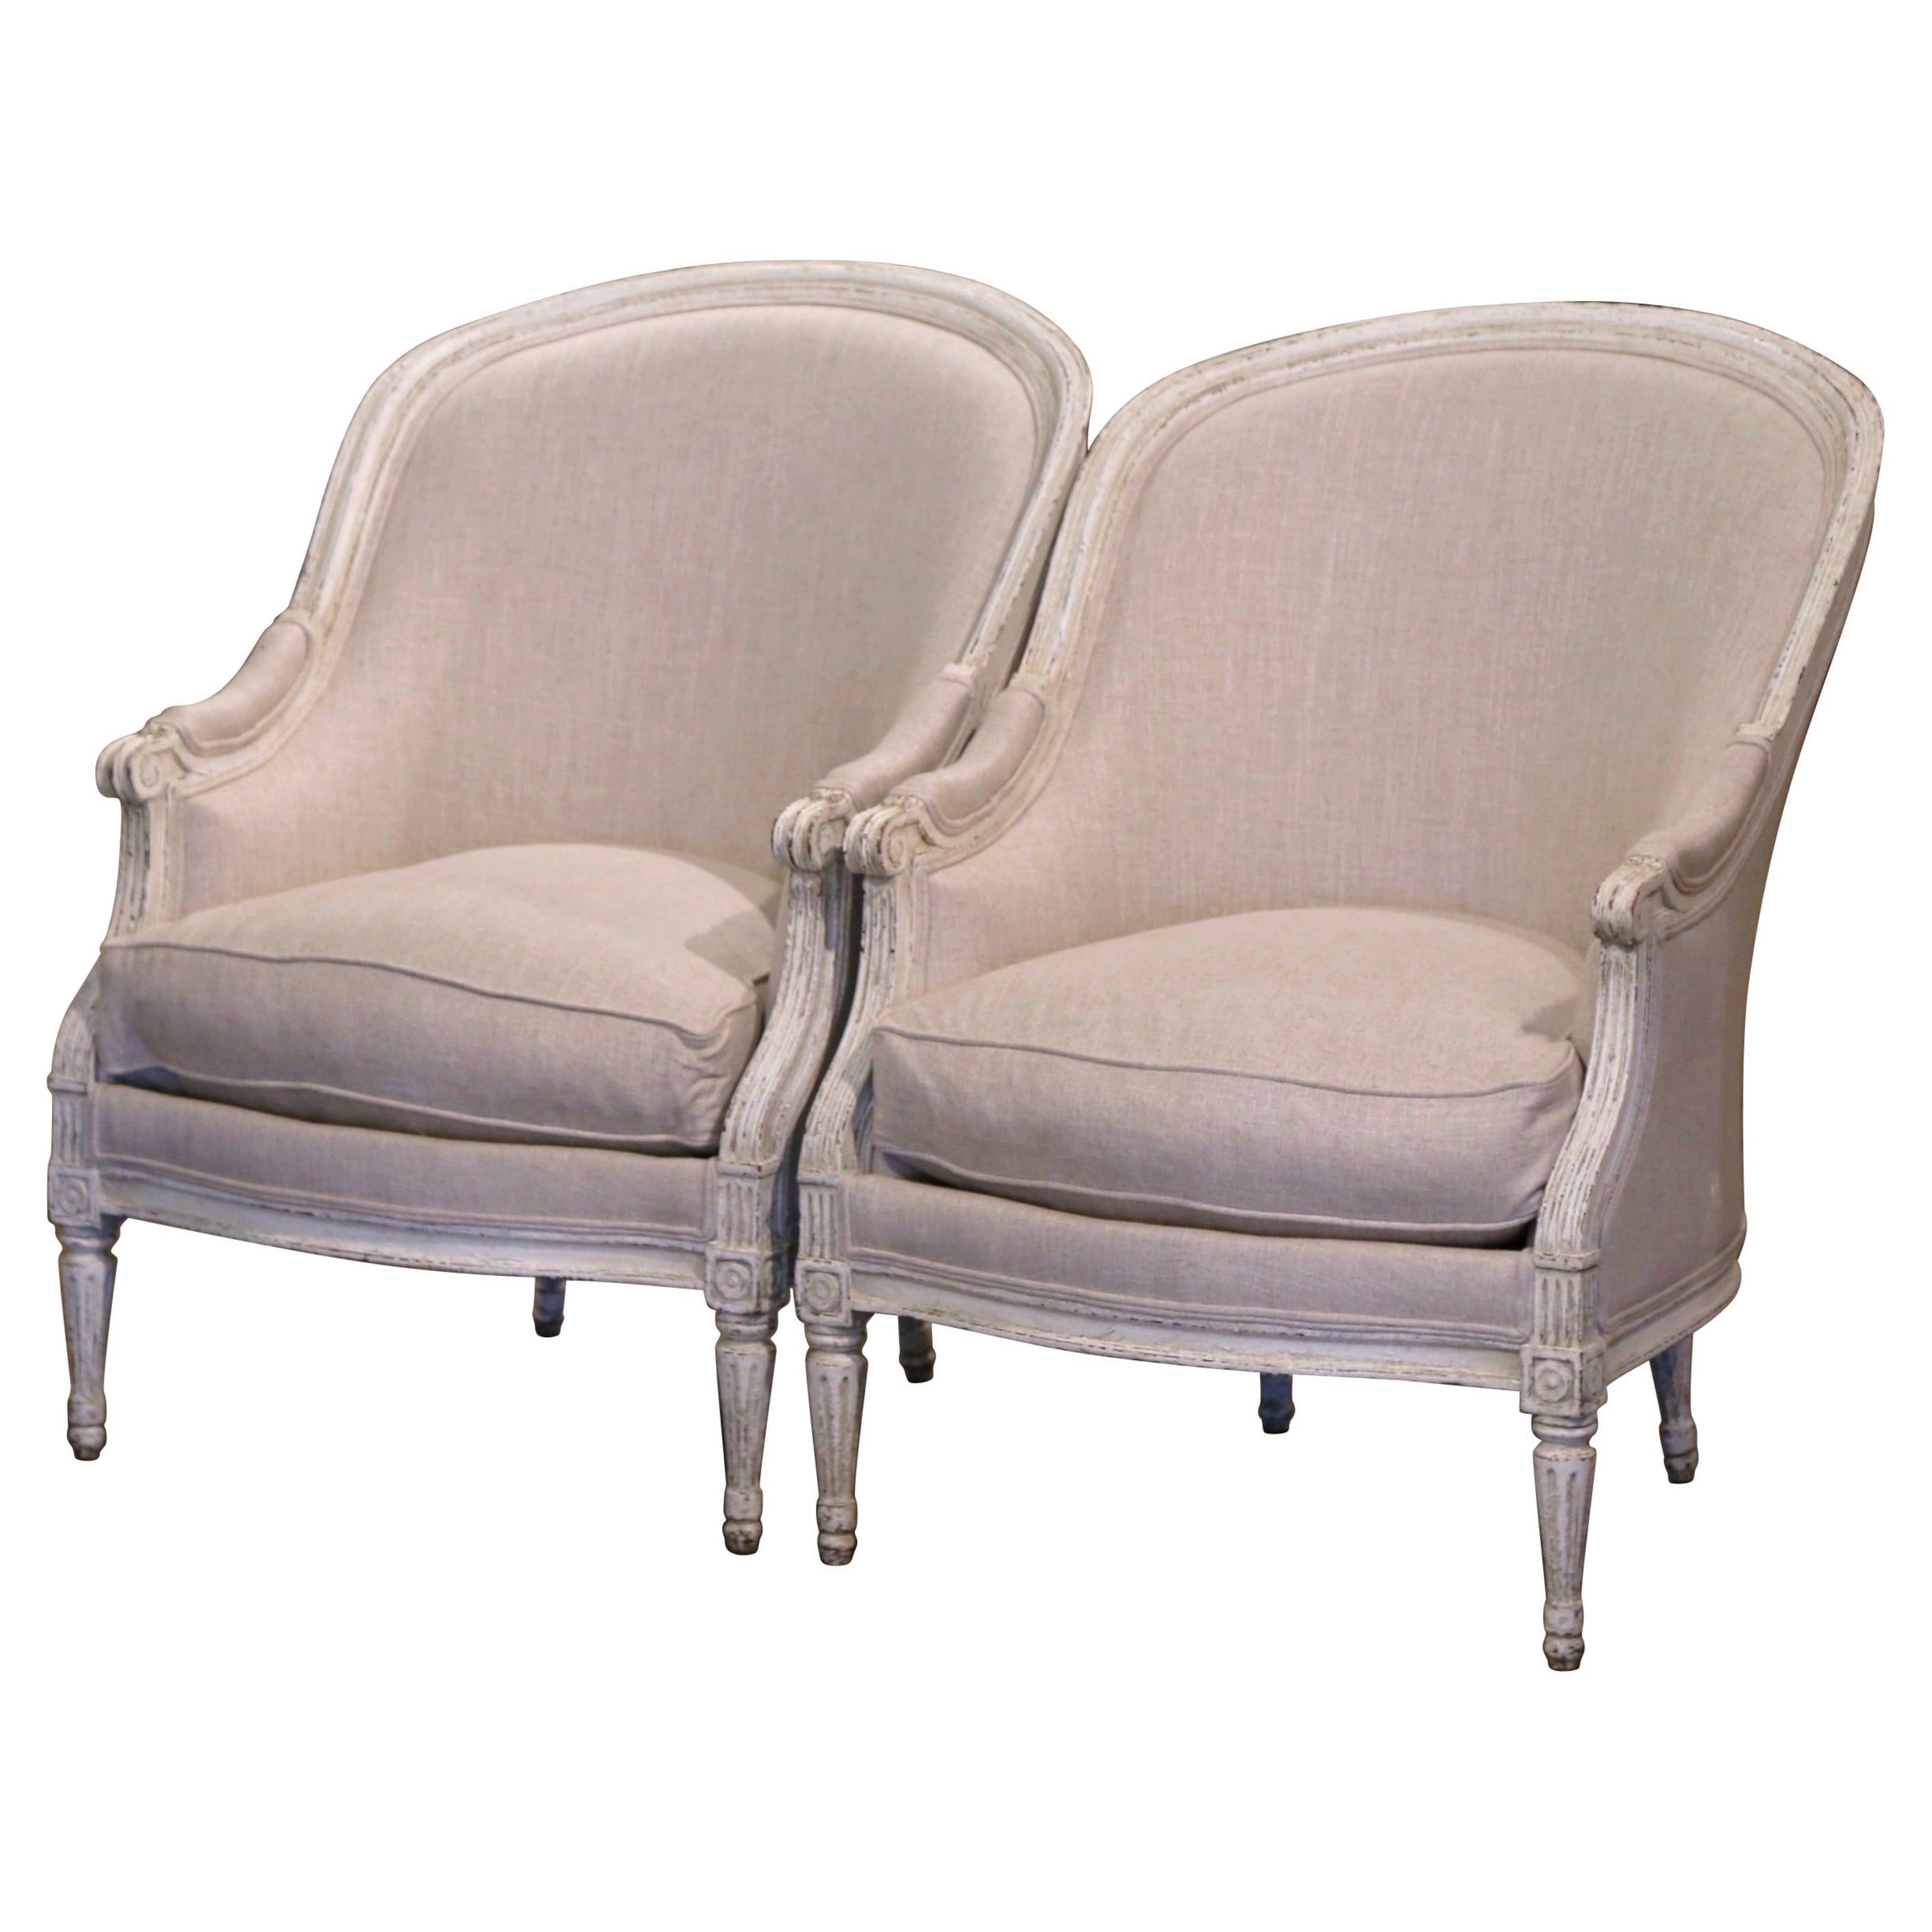 Pair of 19th Century French Louis XVI Carved and Painted Upholstered Armchairs